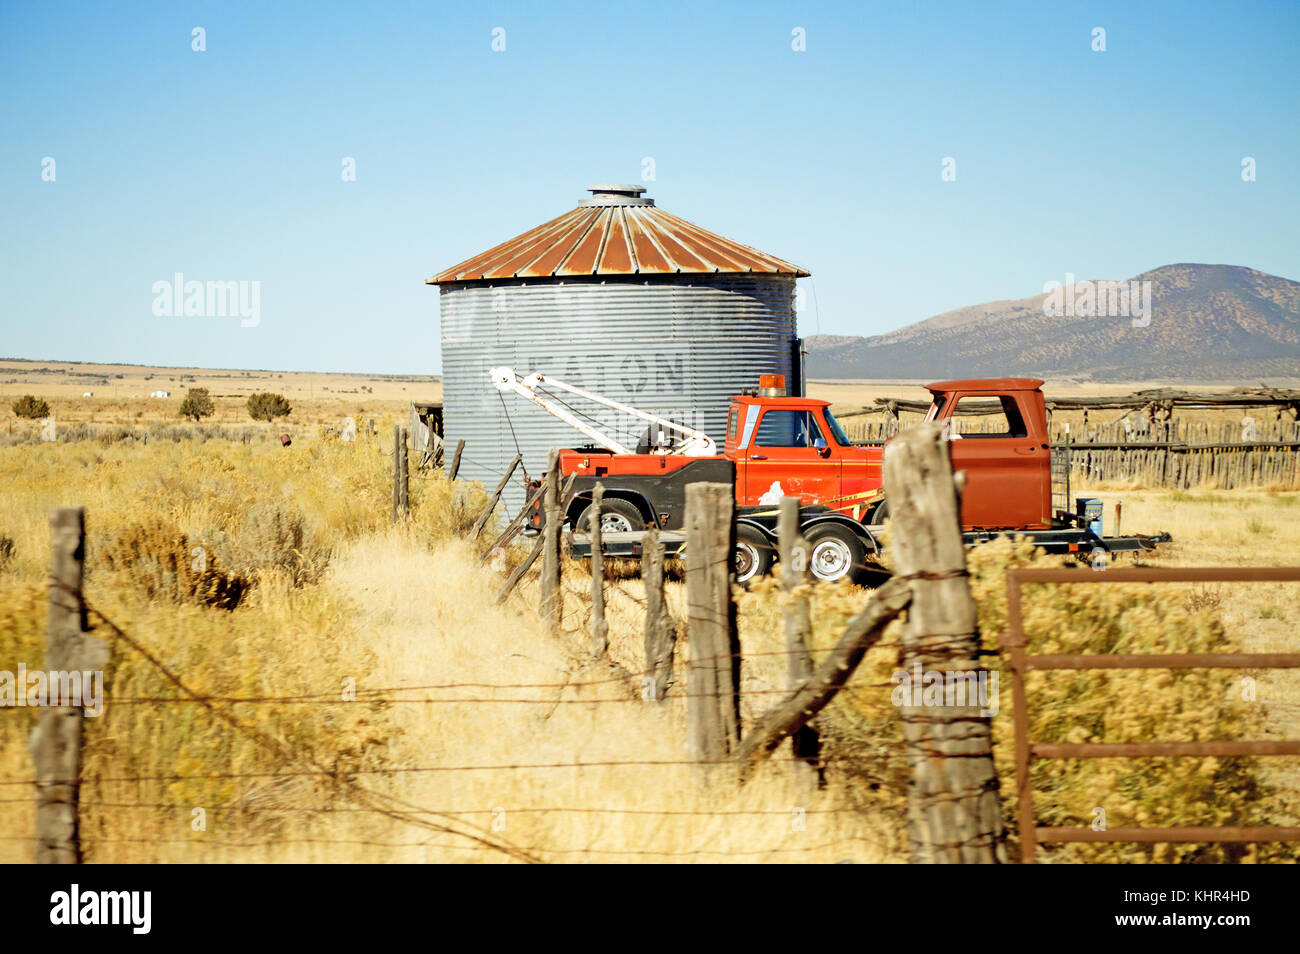 Two old tow trucks beside a silo in a field on a bright blue sky. Stock Photo